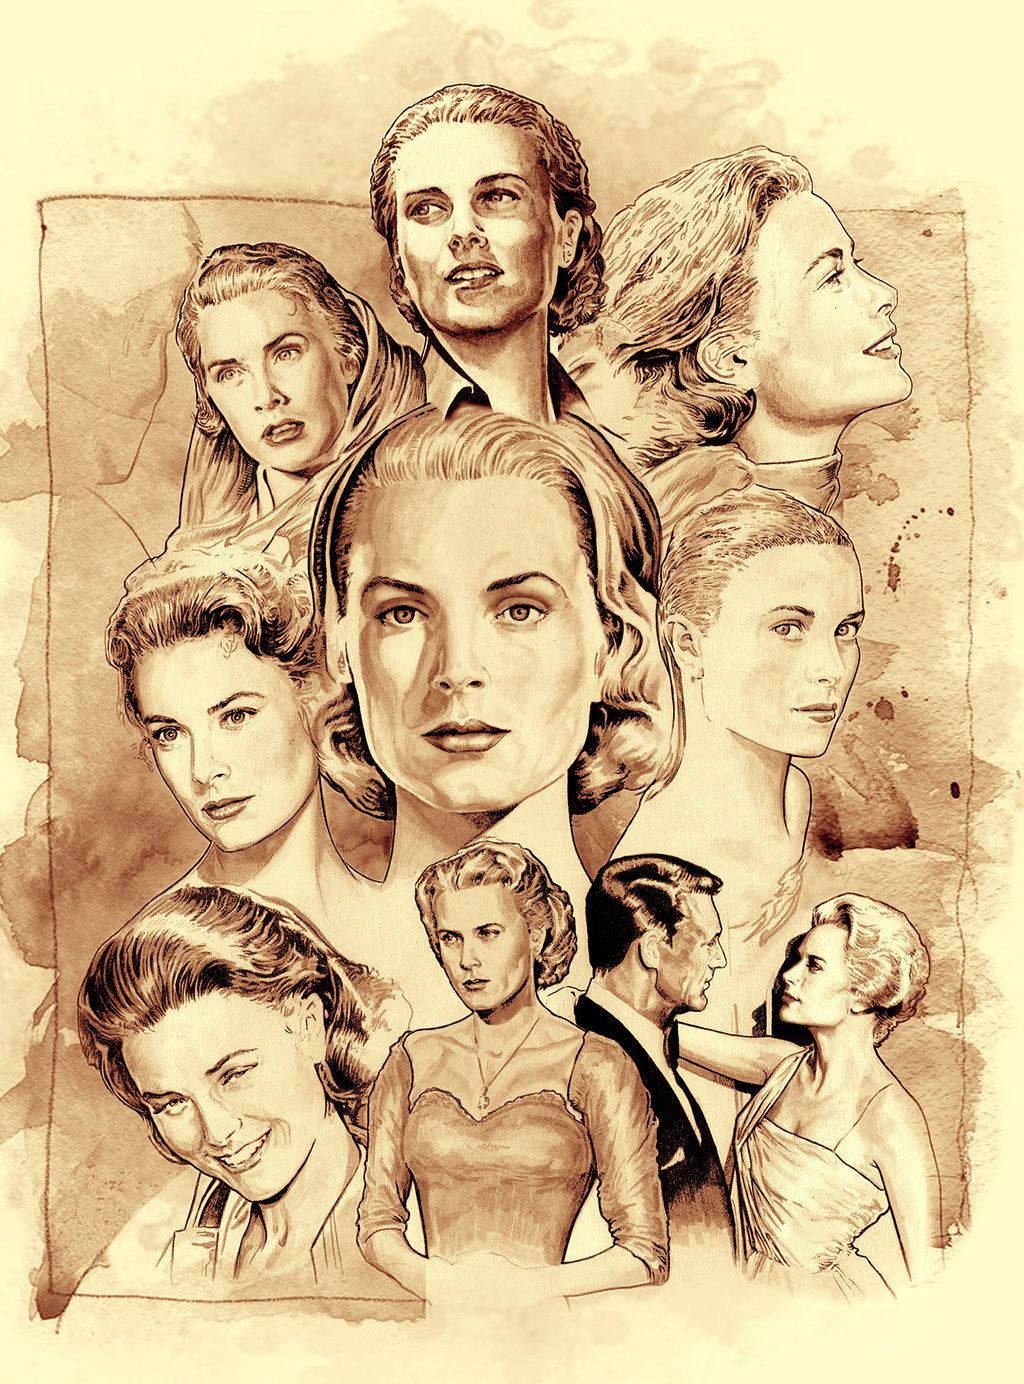 Elegance Personified - A Grace Kelly Art Collage Background